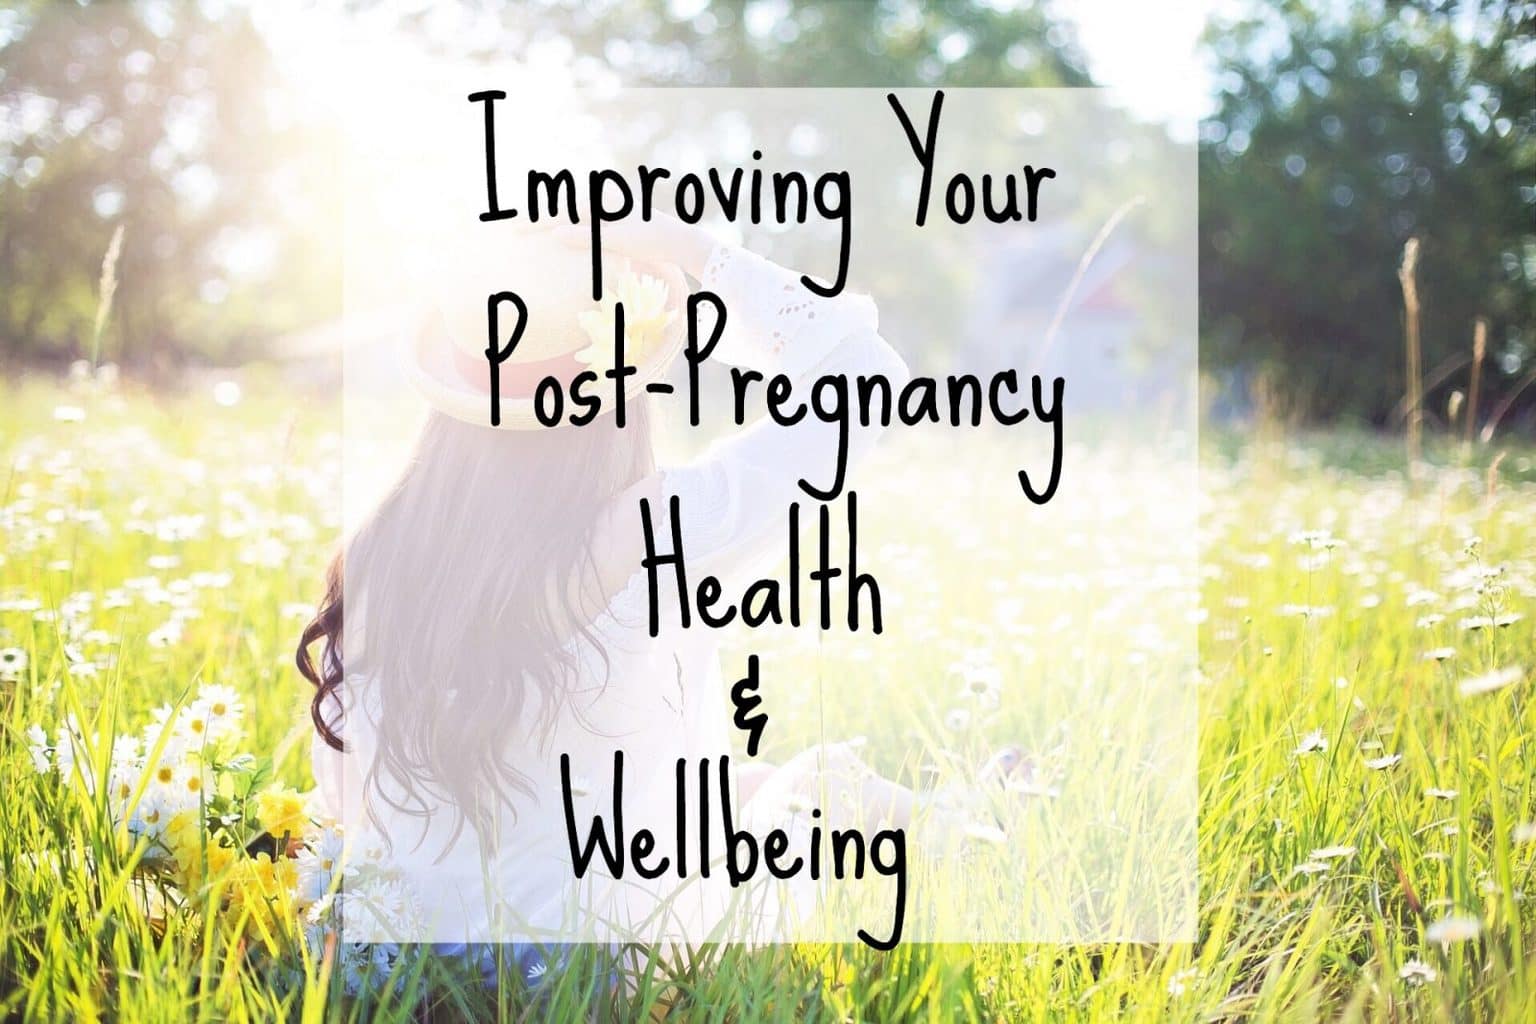 Why Improving Your Post-Pregnancy Health & Wellbeing Is So Important